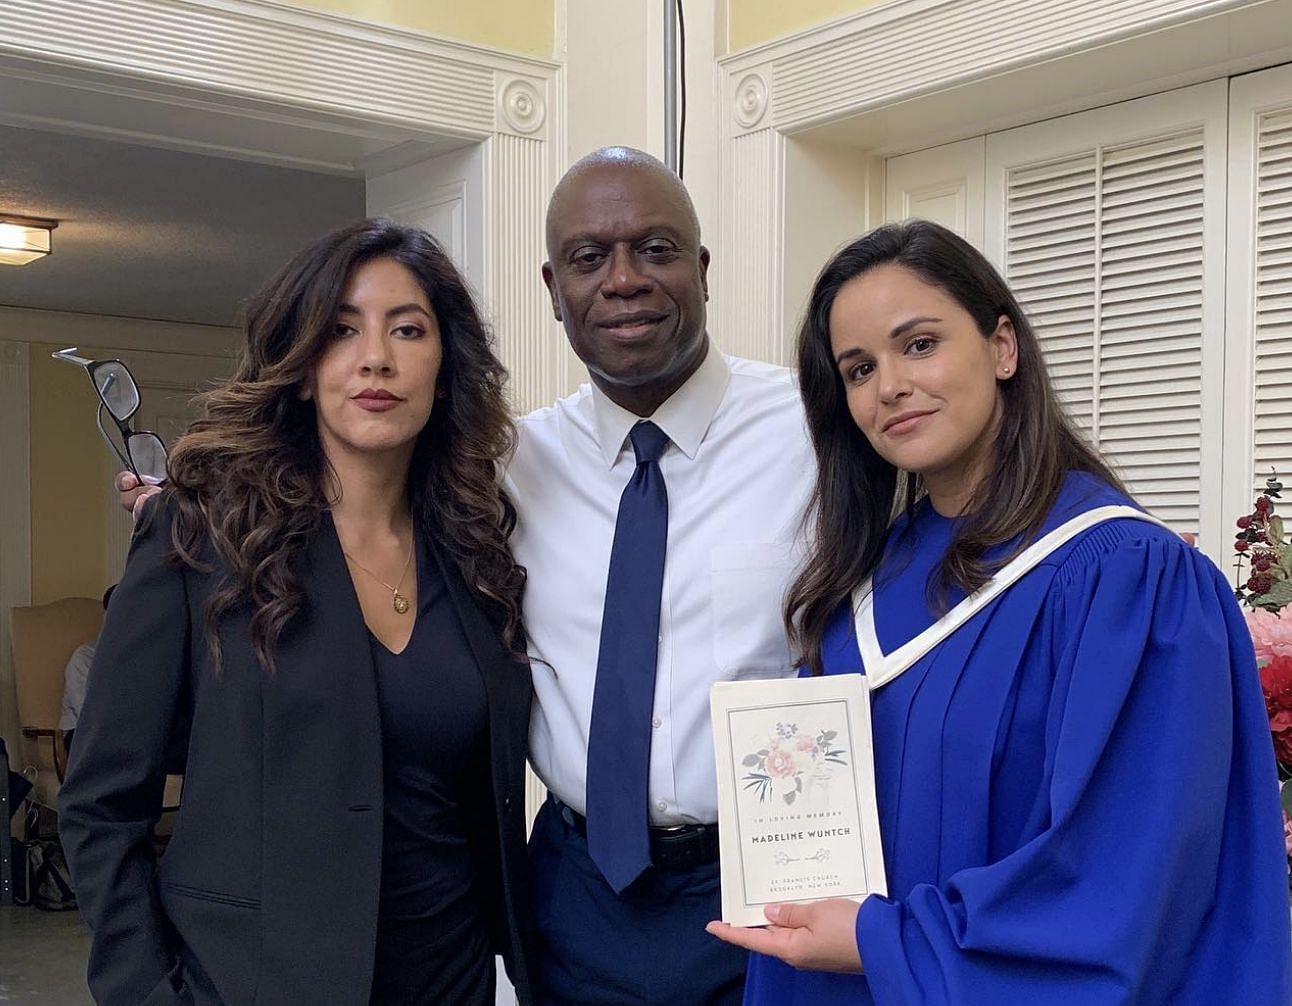 Braugher posing with the characters Rosa and Amy from Brooklyn Nine-Nine (Image via Instagram/@andrebraugher)